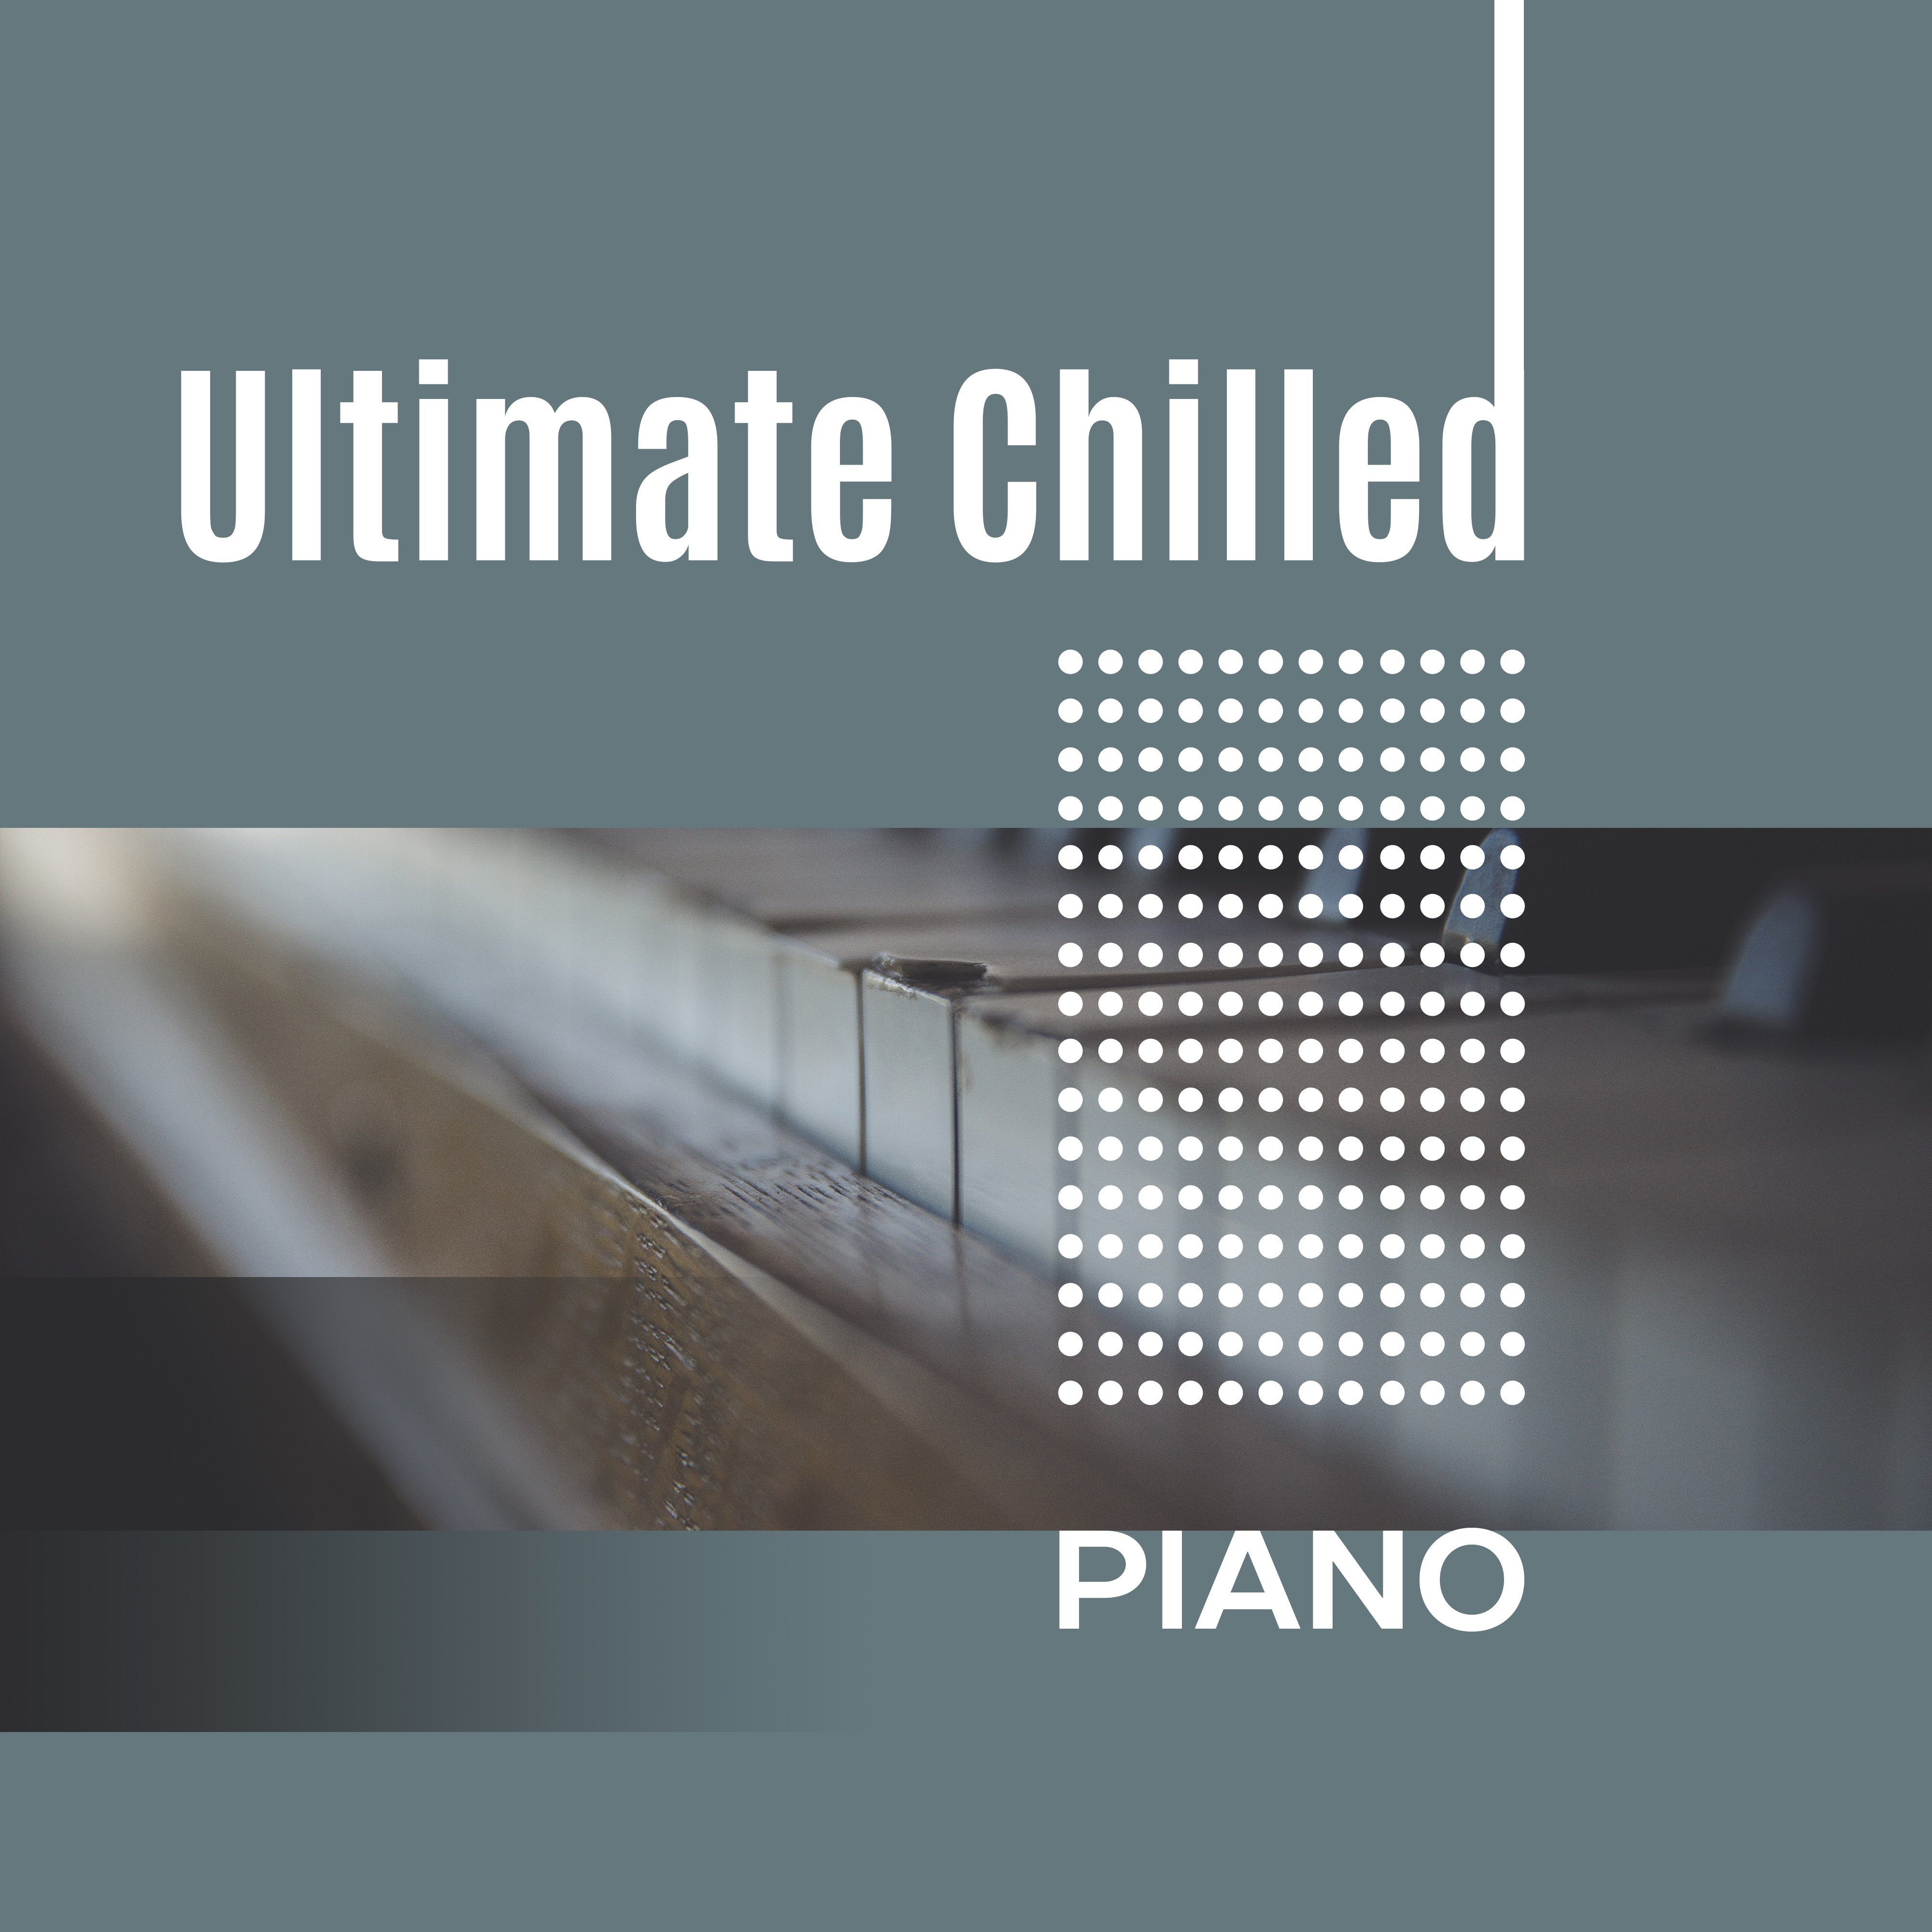 Ultimate Chilled Piano  Instrumental Music, Smooth Jazz, Ambient, Simple Piano, Ultimate Jazz